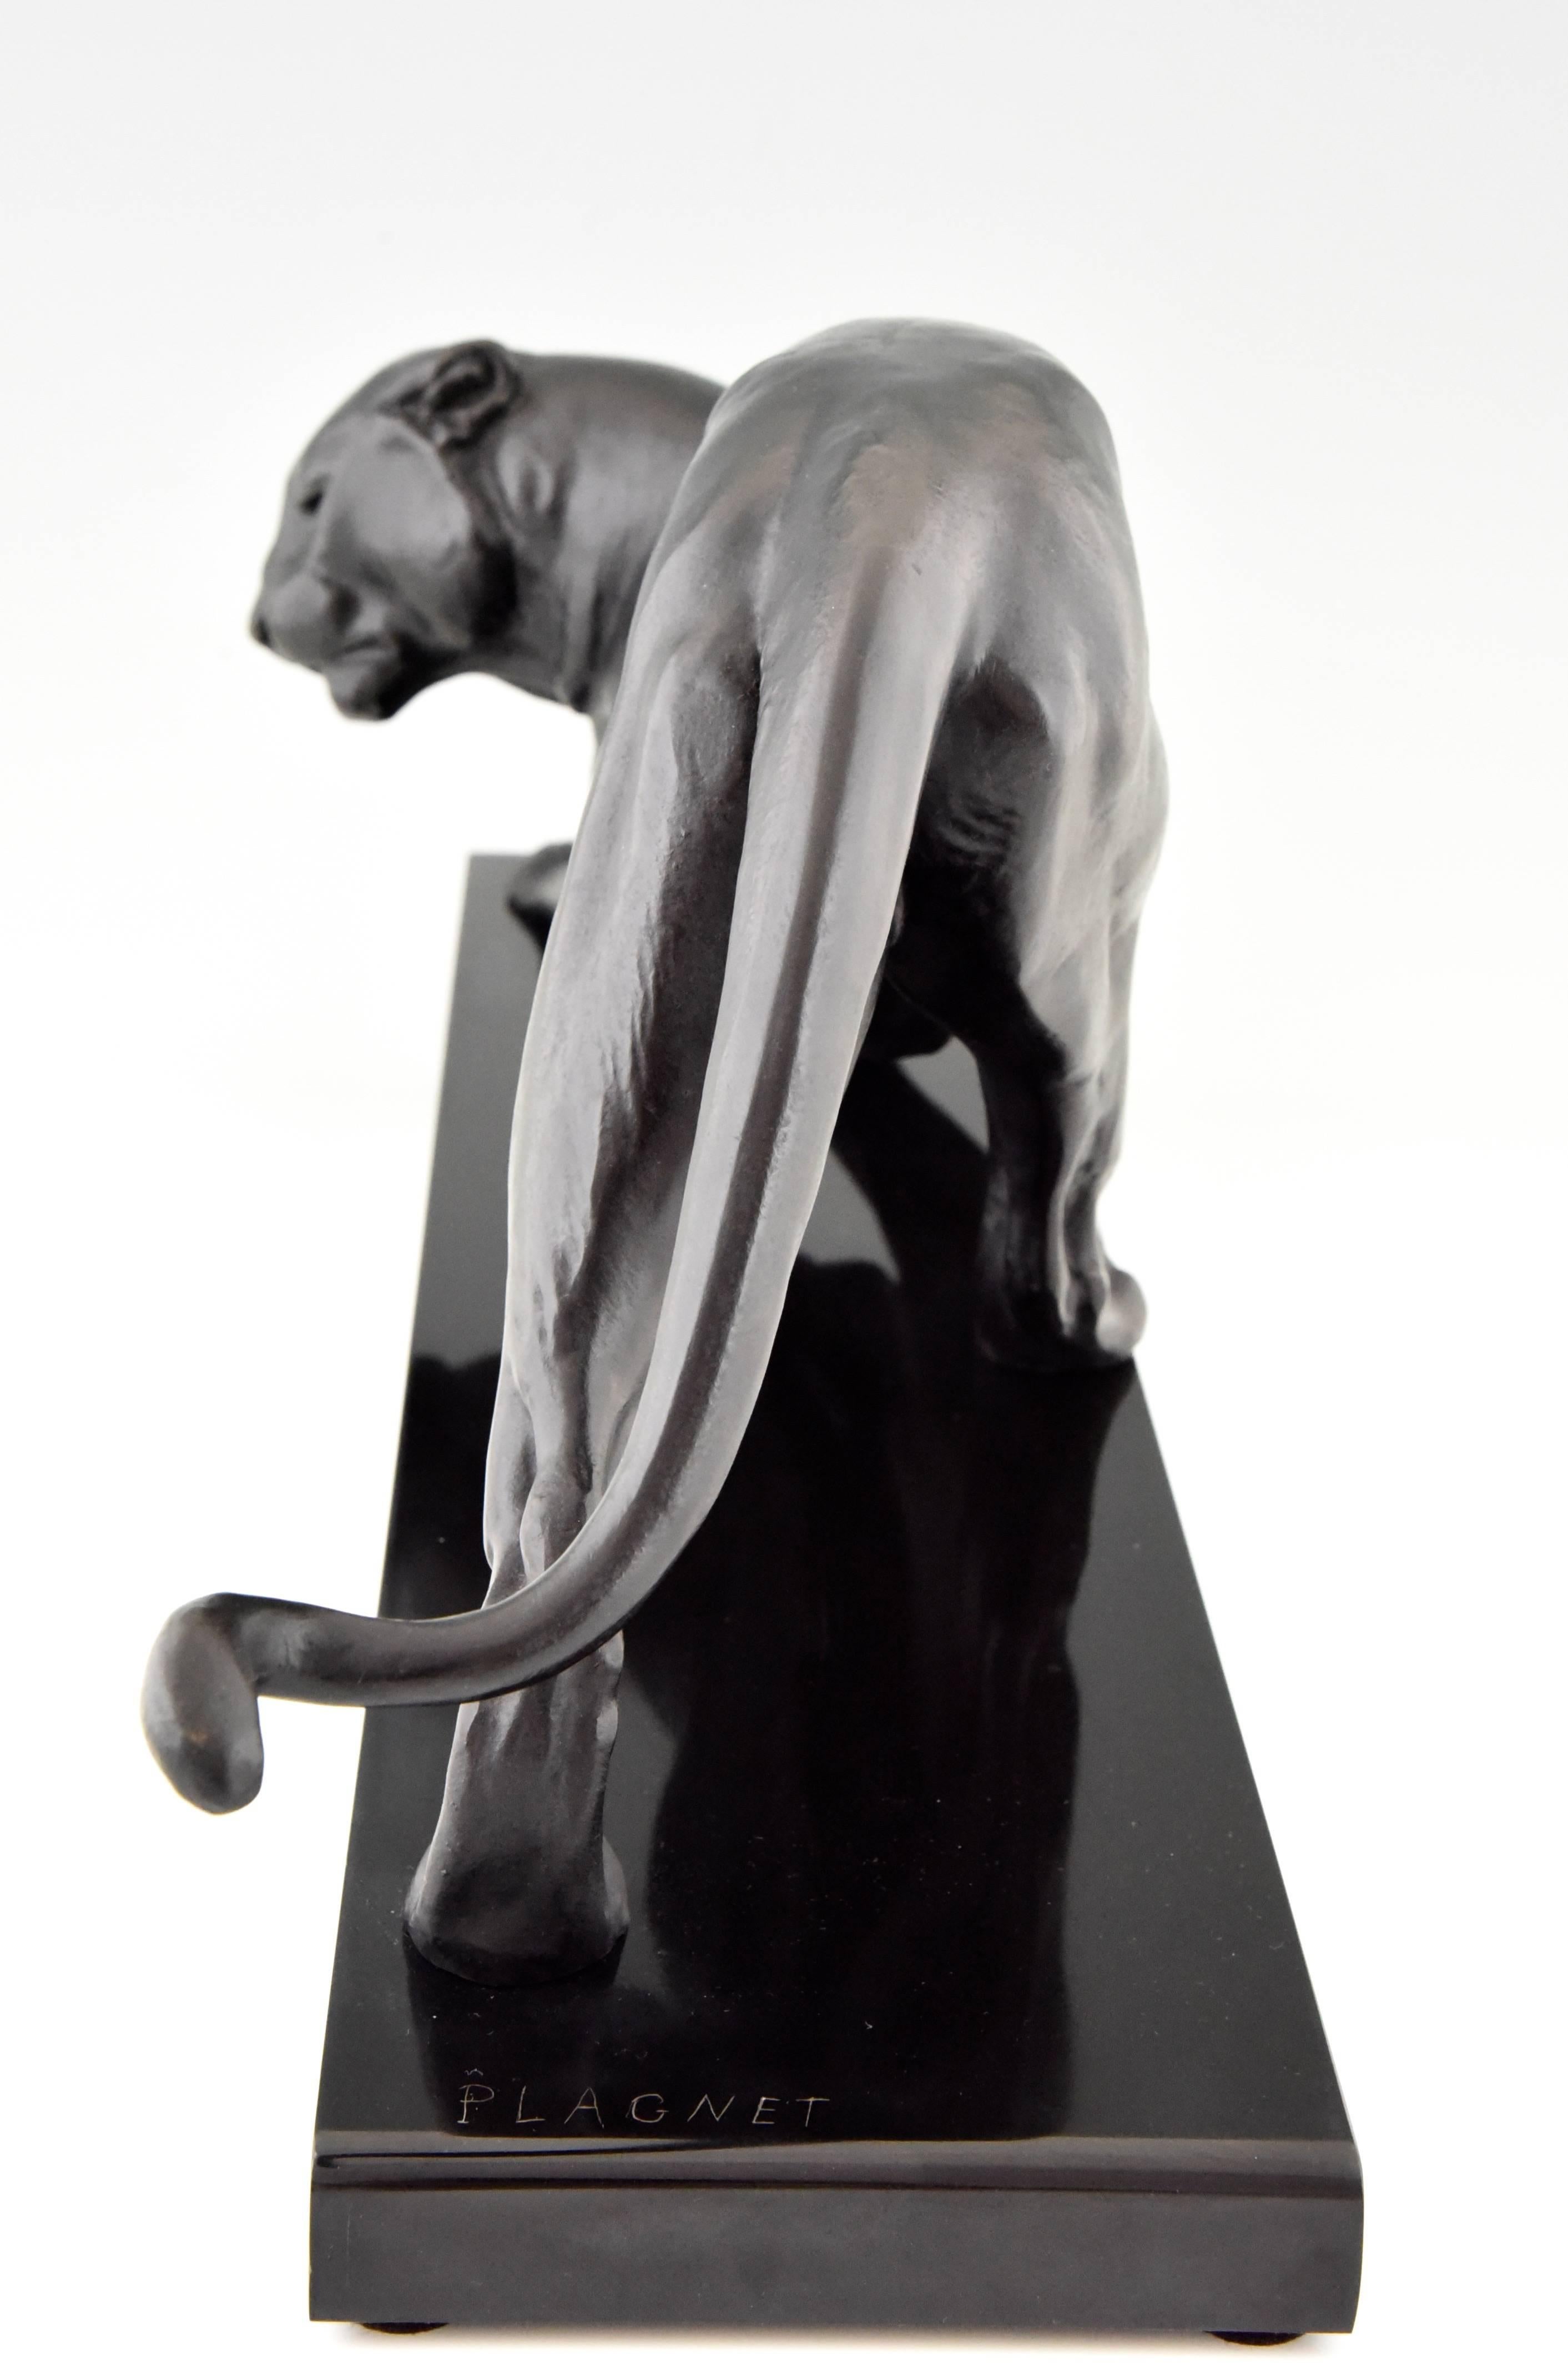 French Art Deco Panther Sculpture by Plagnet, 1930 3